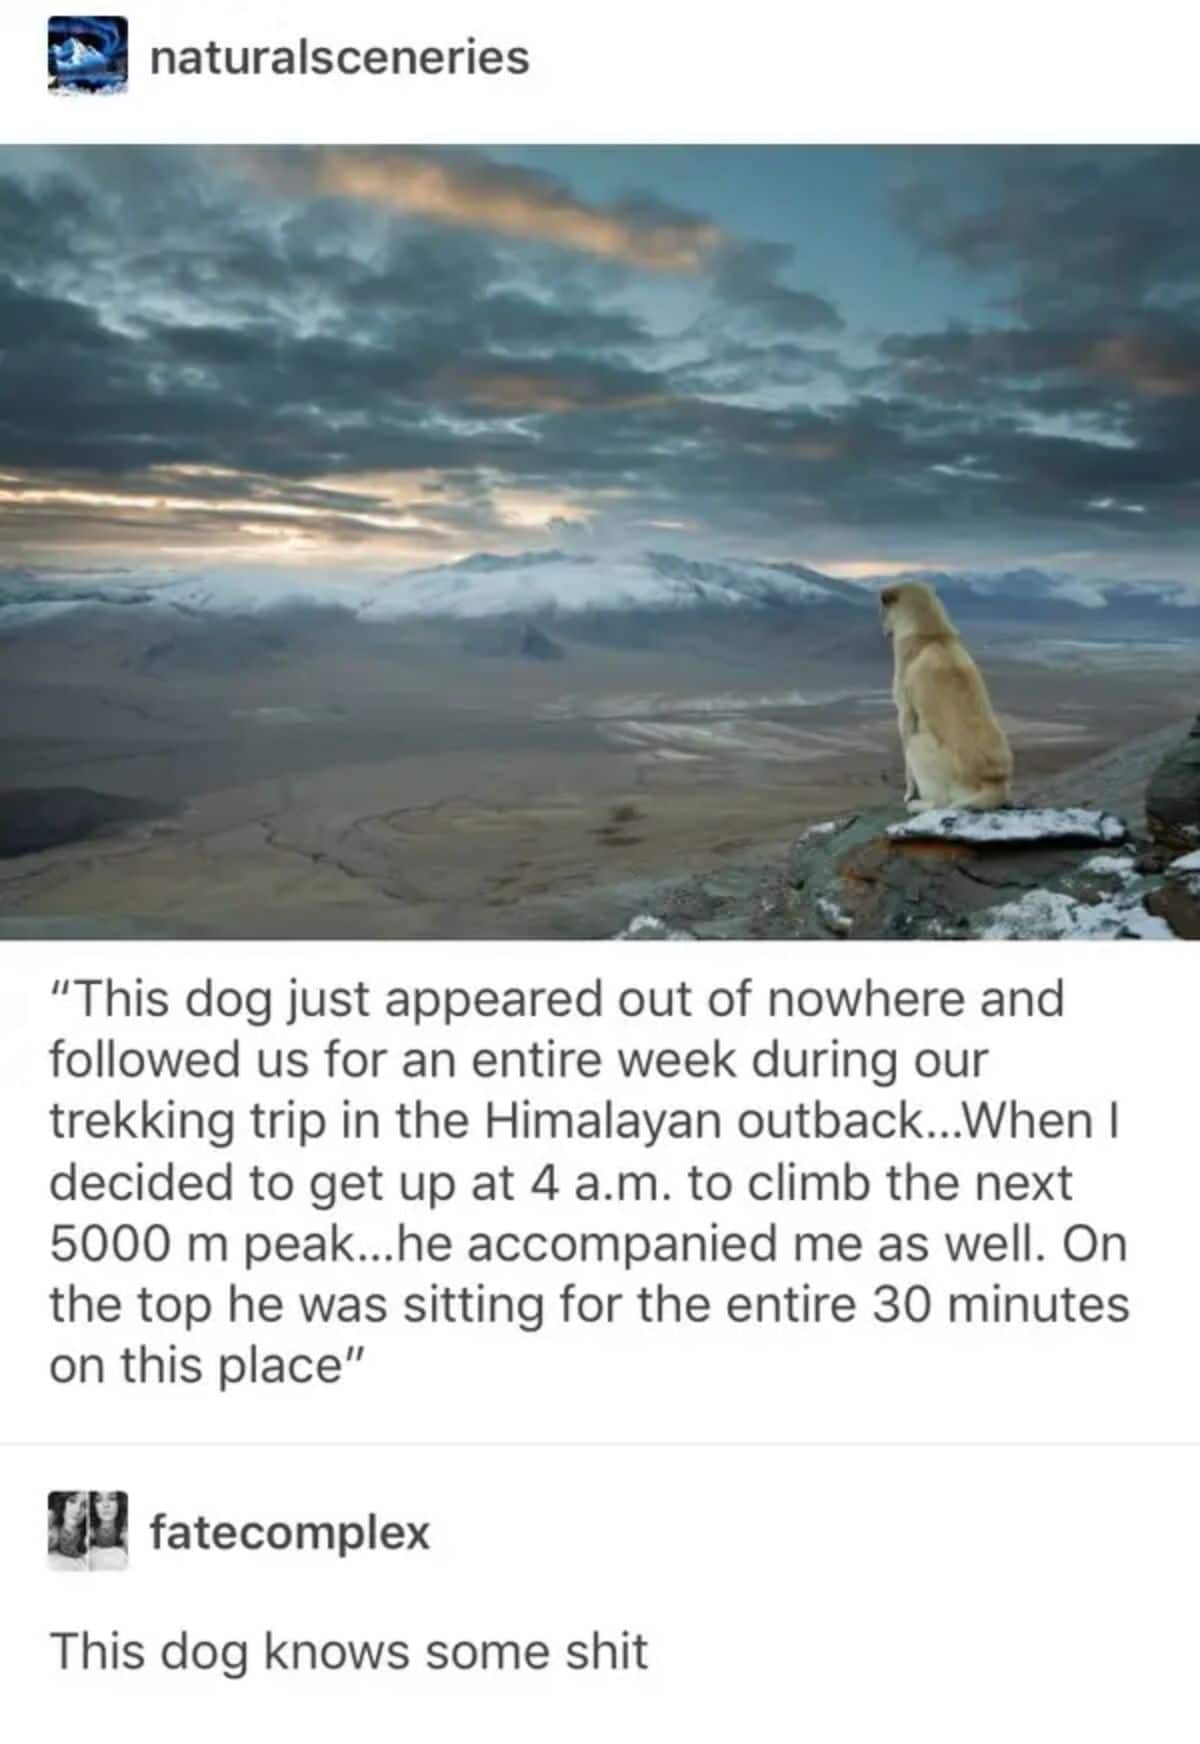 brown dog sitting on cliff enjoying the view with caption saying the dog followed them on the Himalayan outback